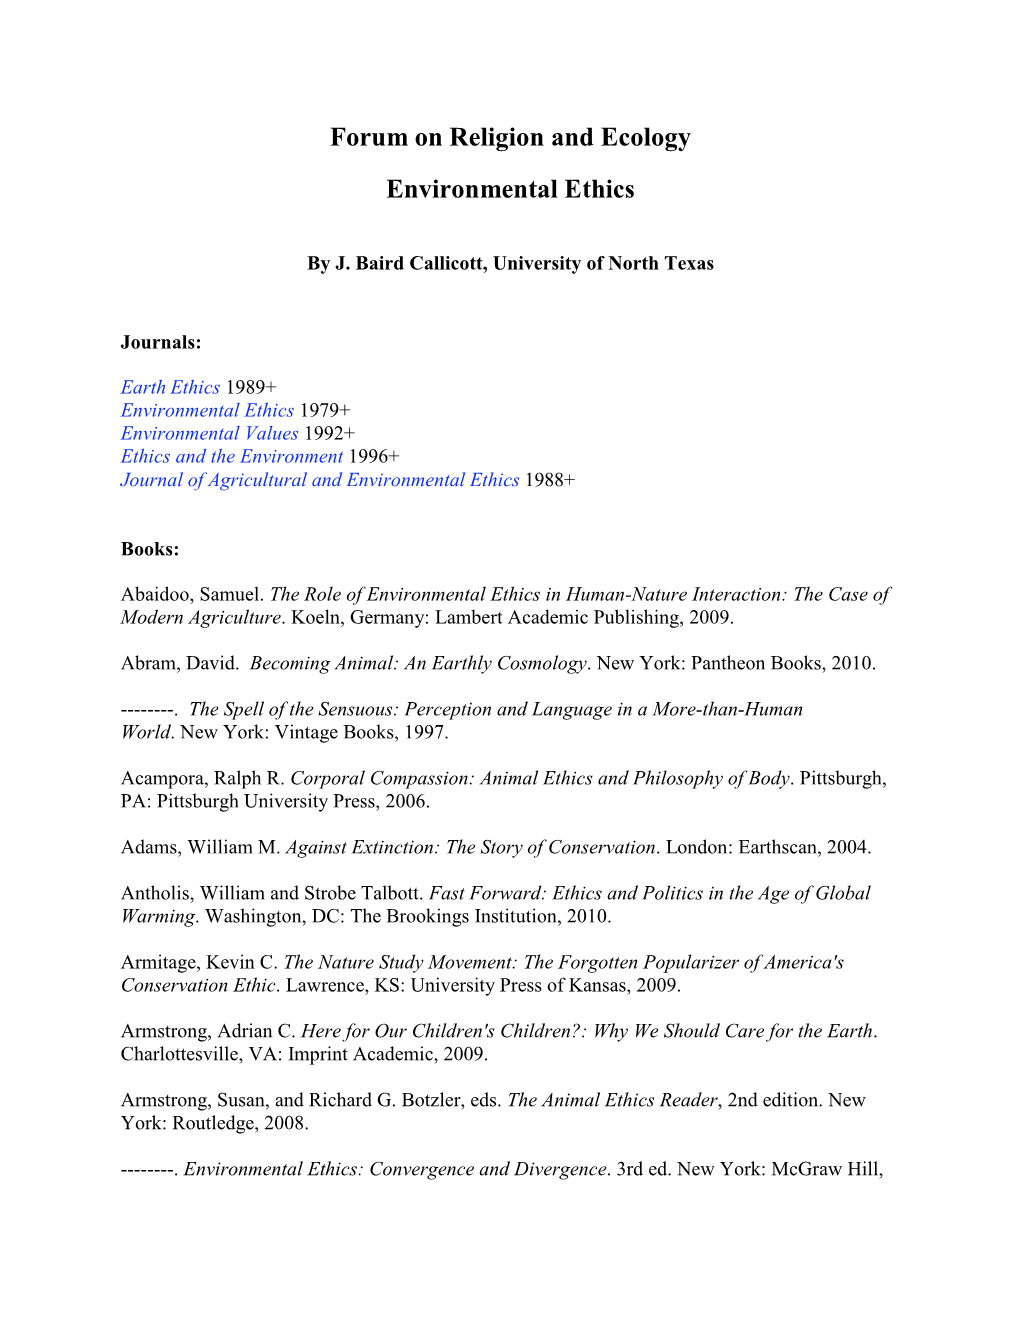 Forum on Religion and Ecology Environmental Ethics